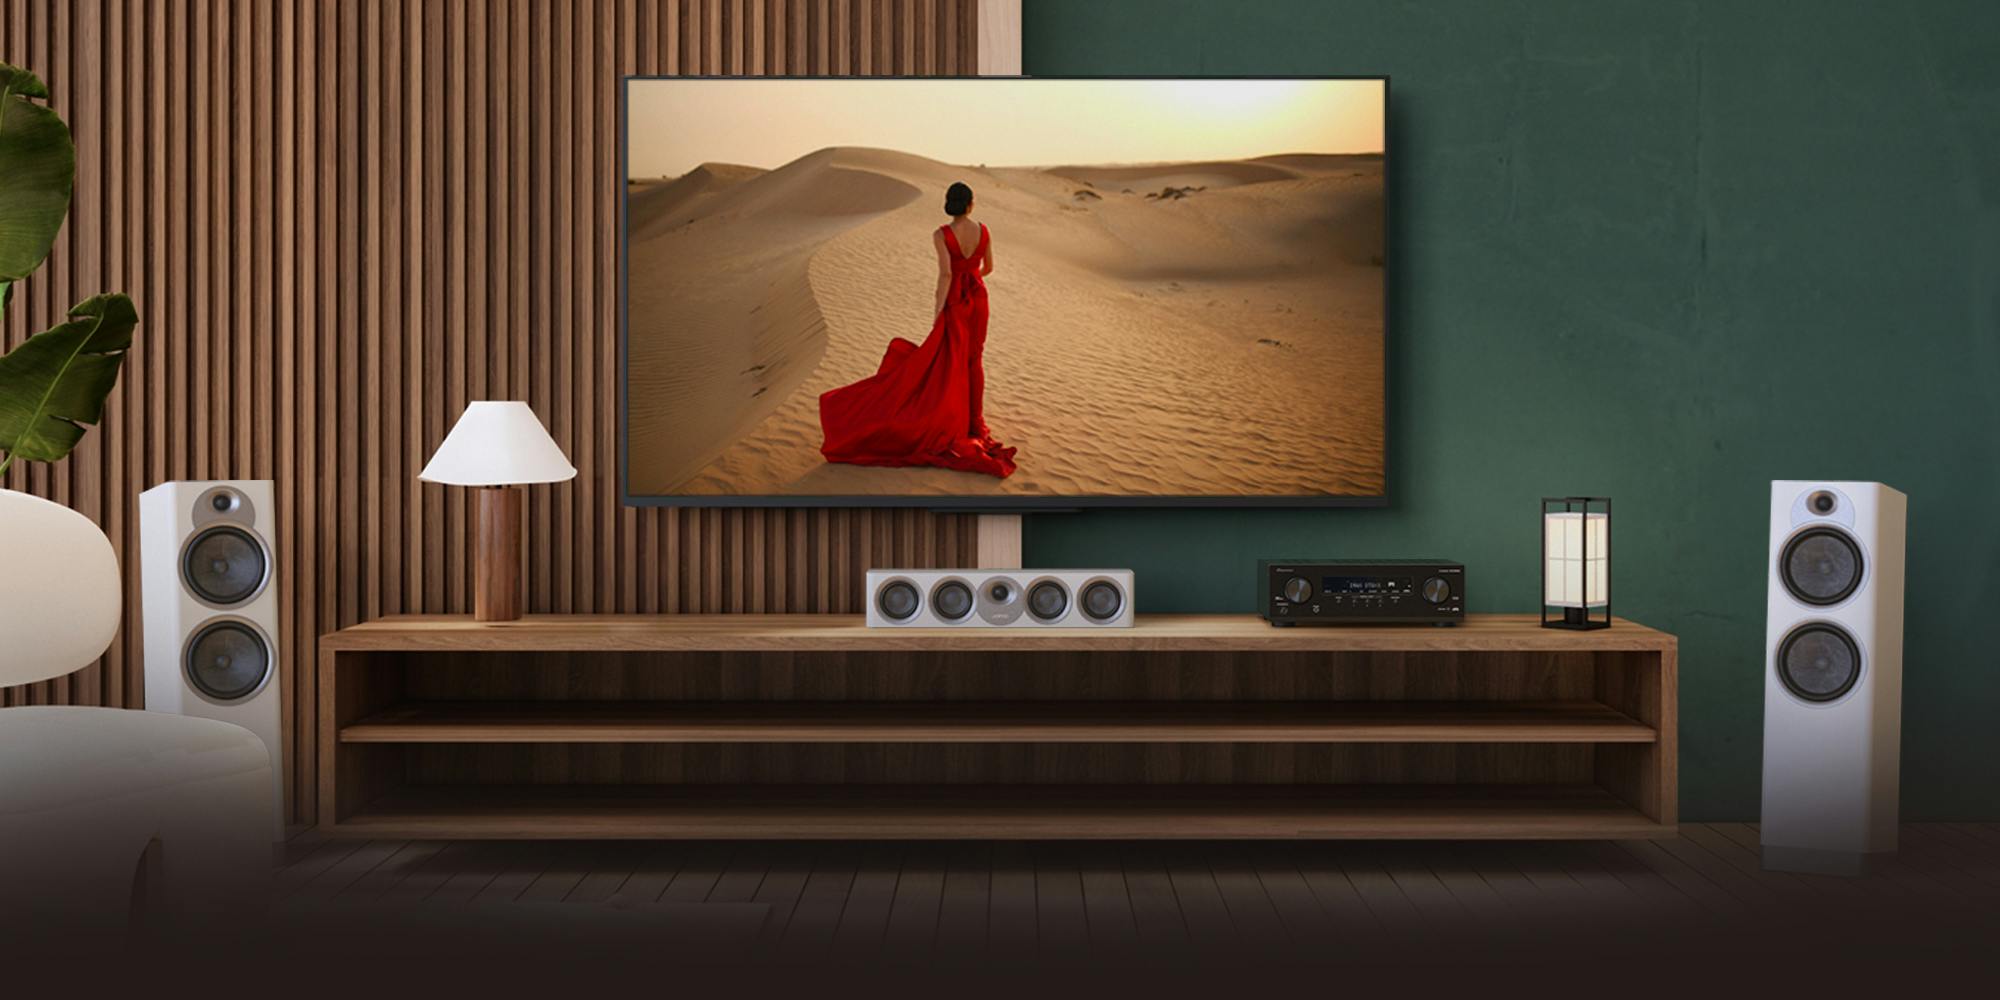 Pioneer VSX 835 powering home Jamo system with red dress woman on tv 2000x1000